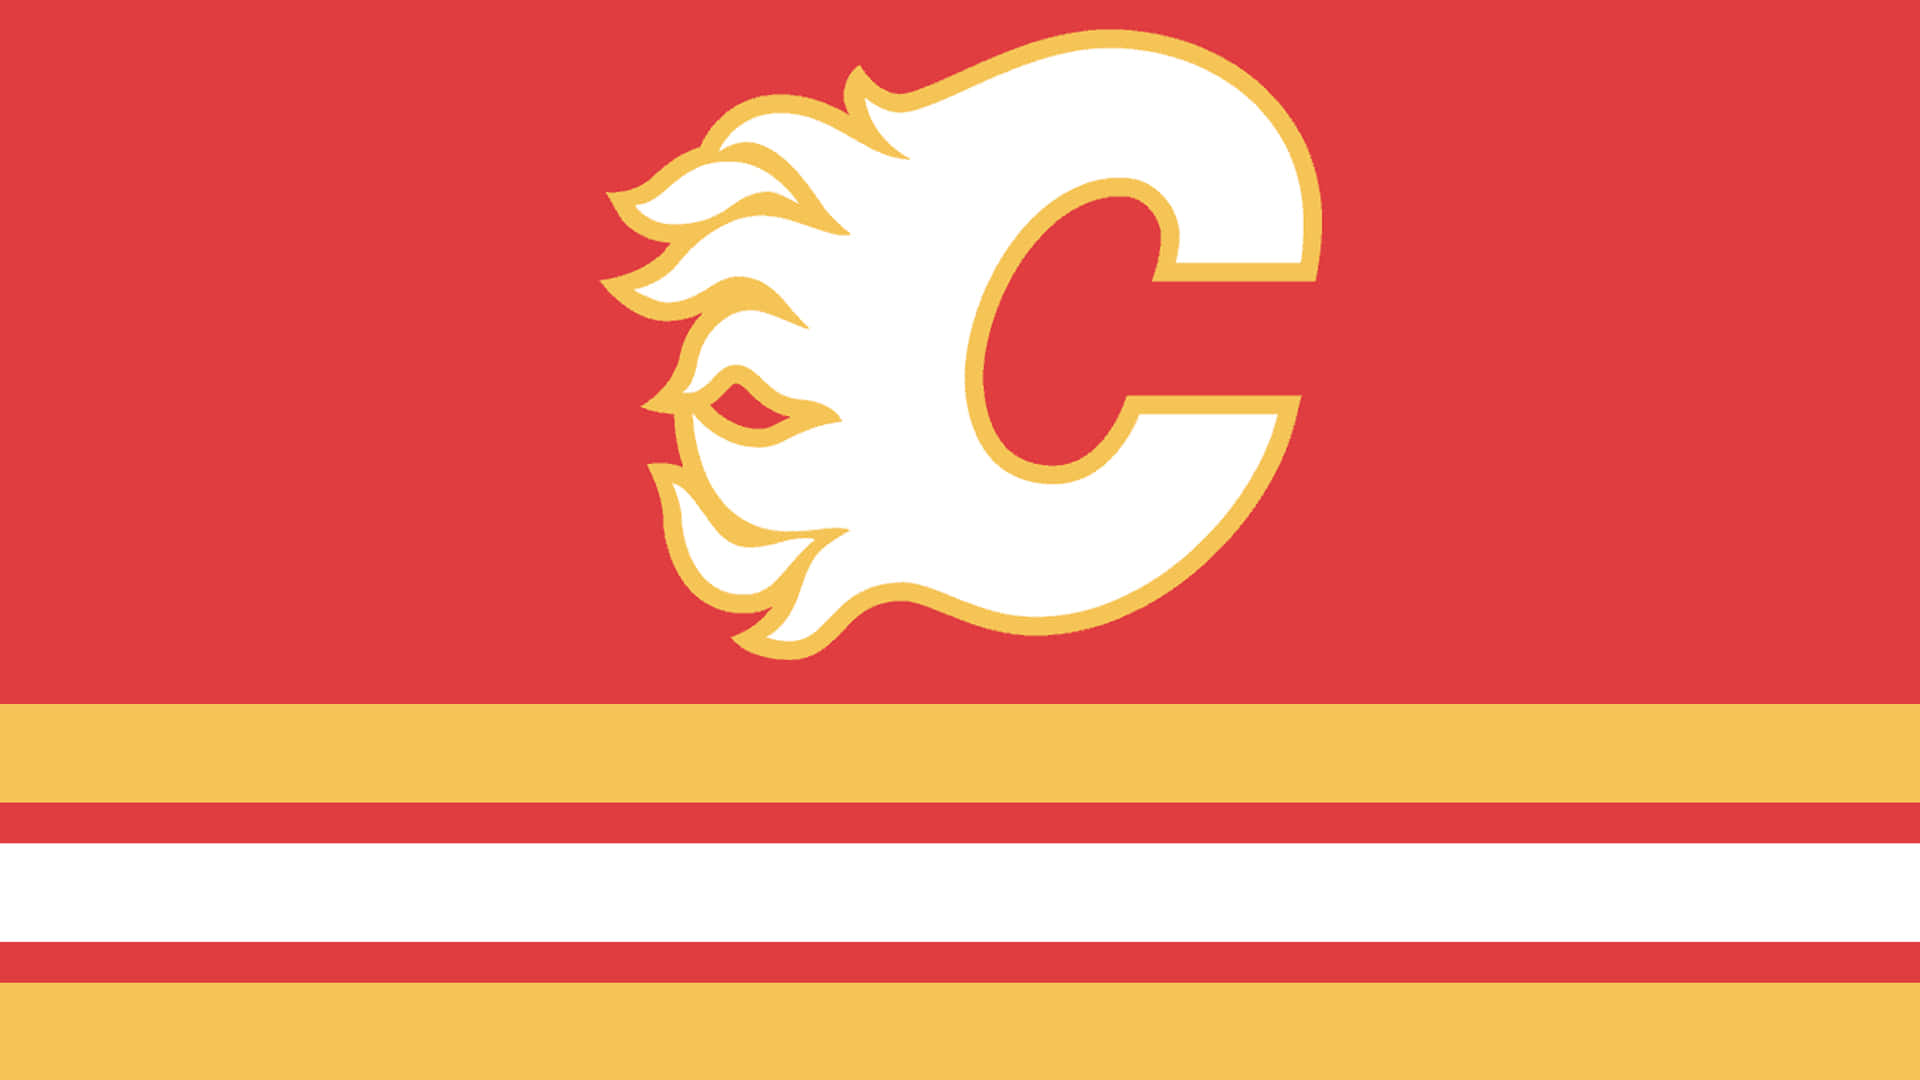 Cheer on Your Favourite Hockey Team – The Calgary Flames